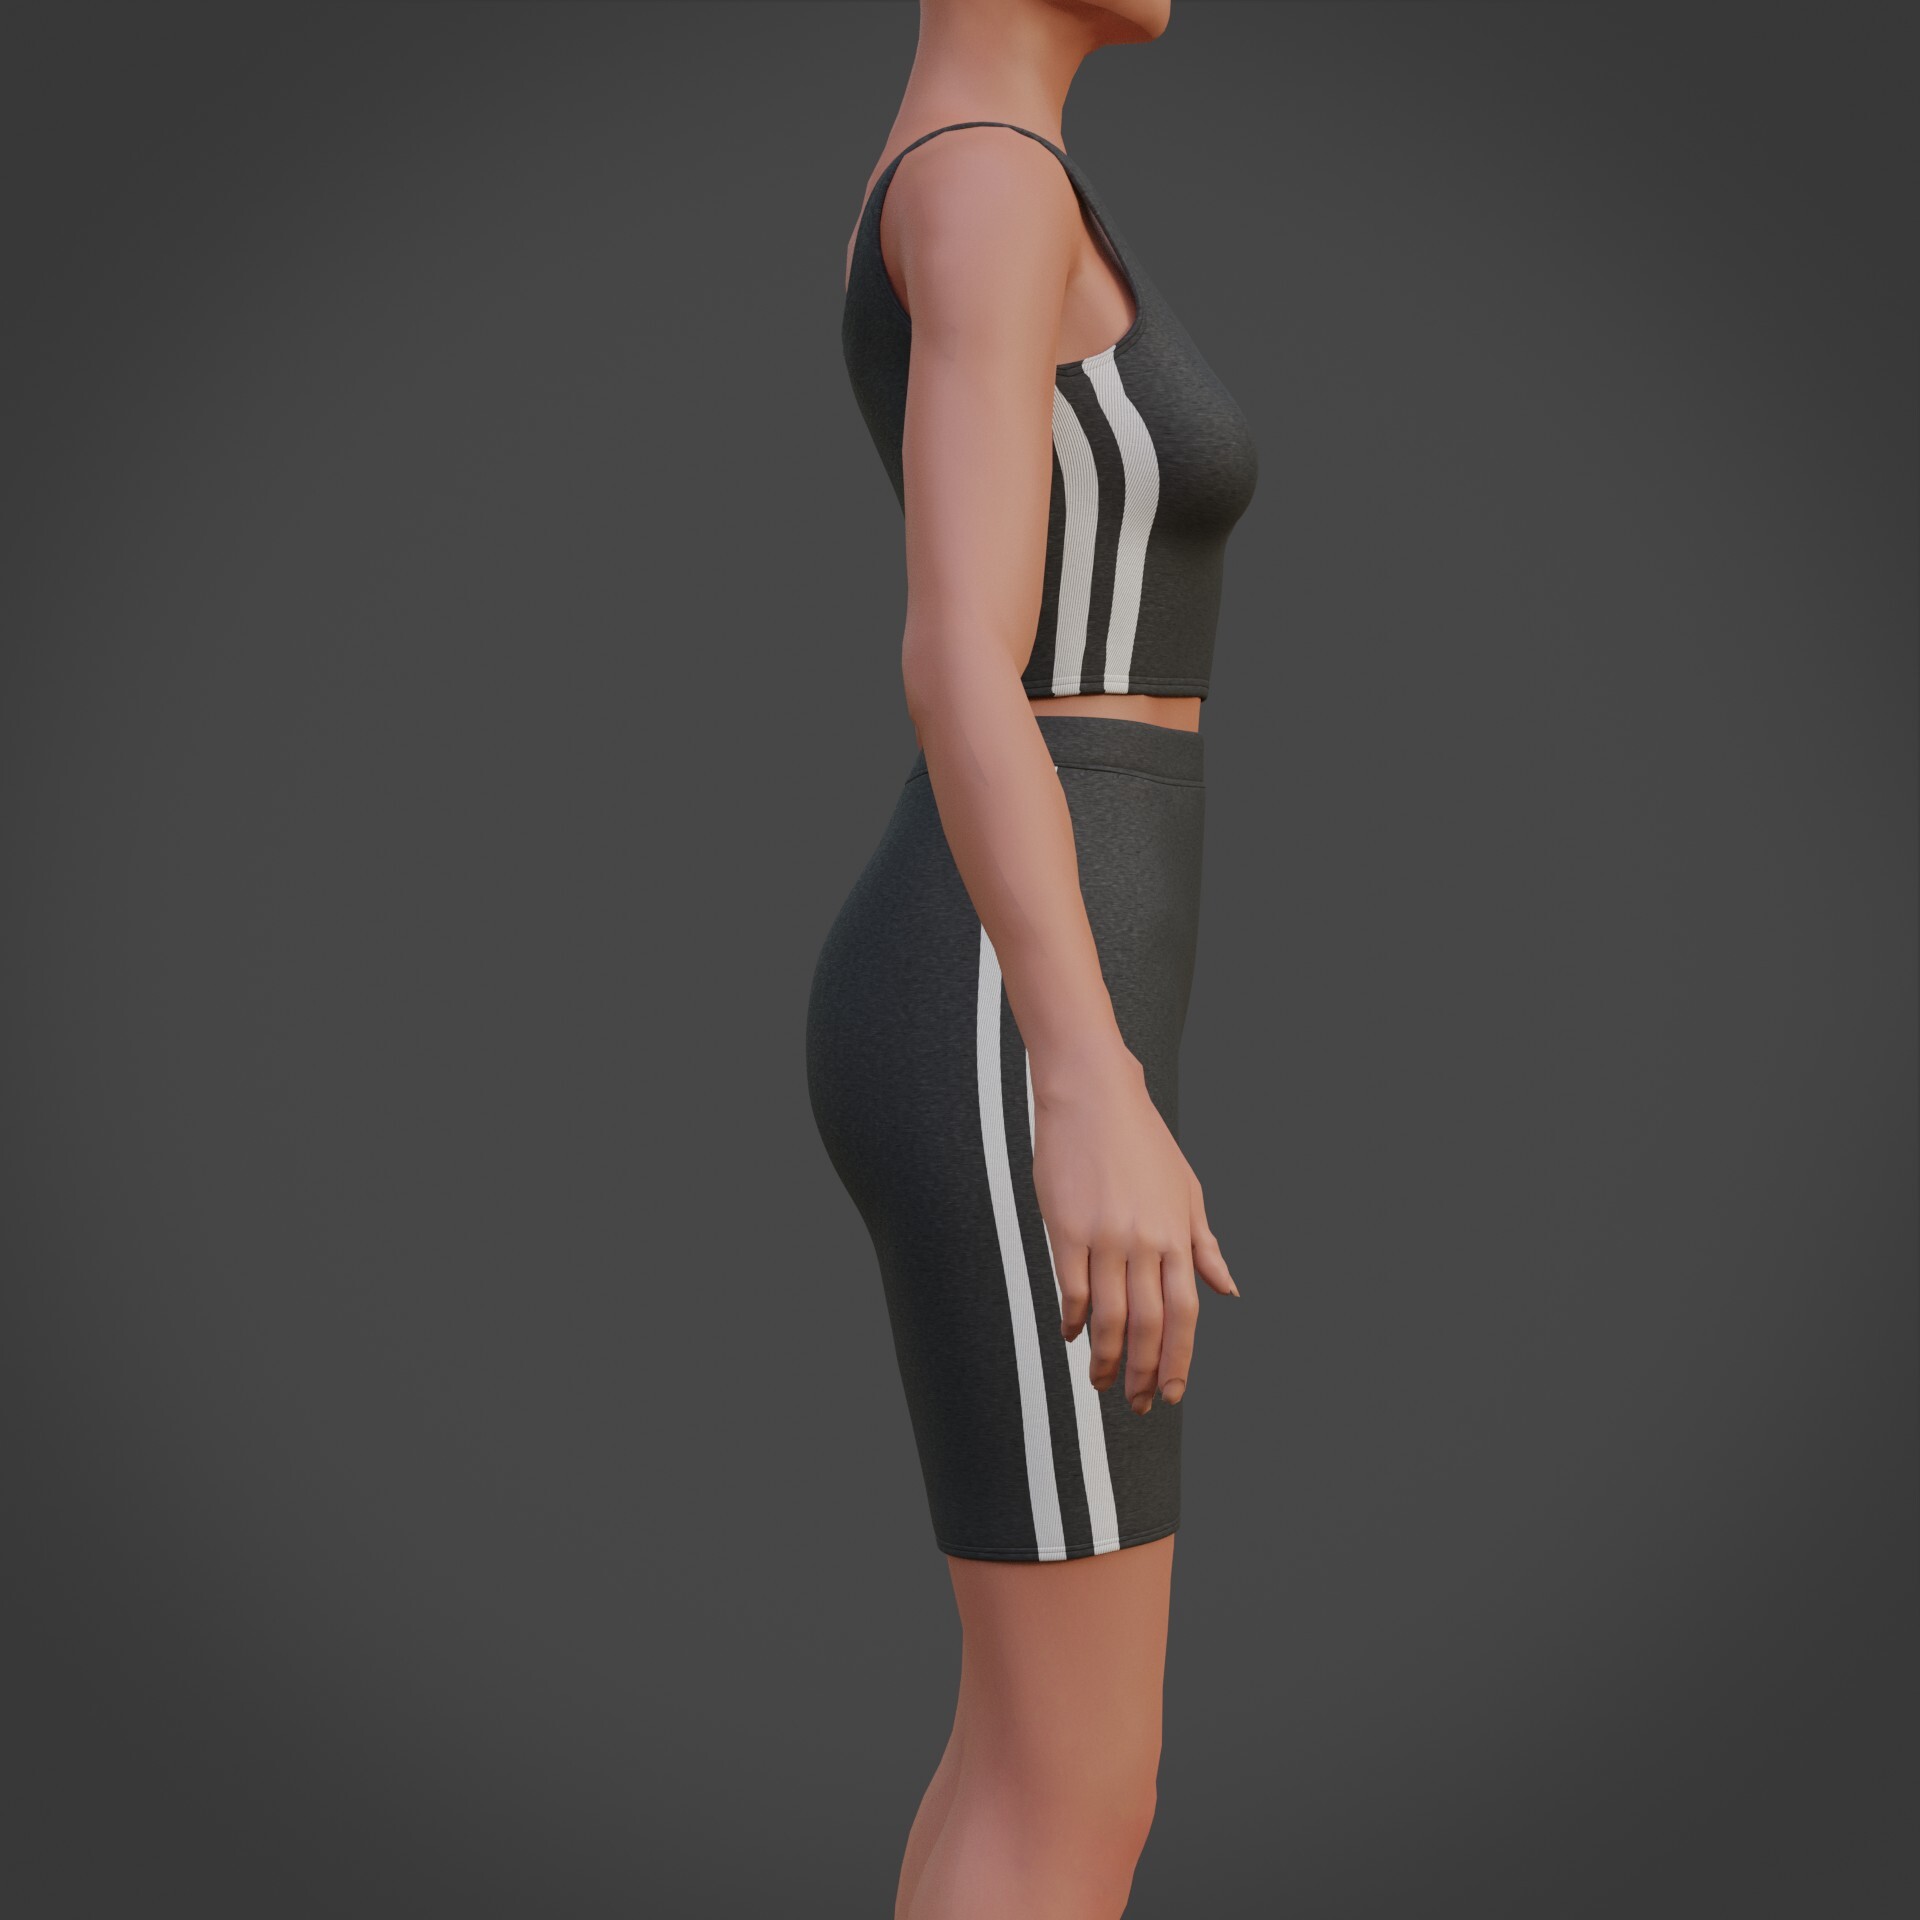 Biker Shorts and Tank Top Outfit - 2 Piece Yoga Set 3D Model by vicky180